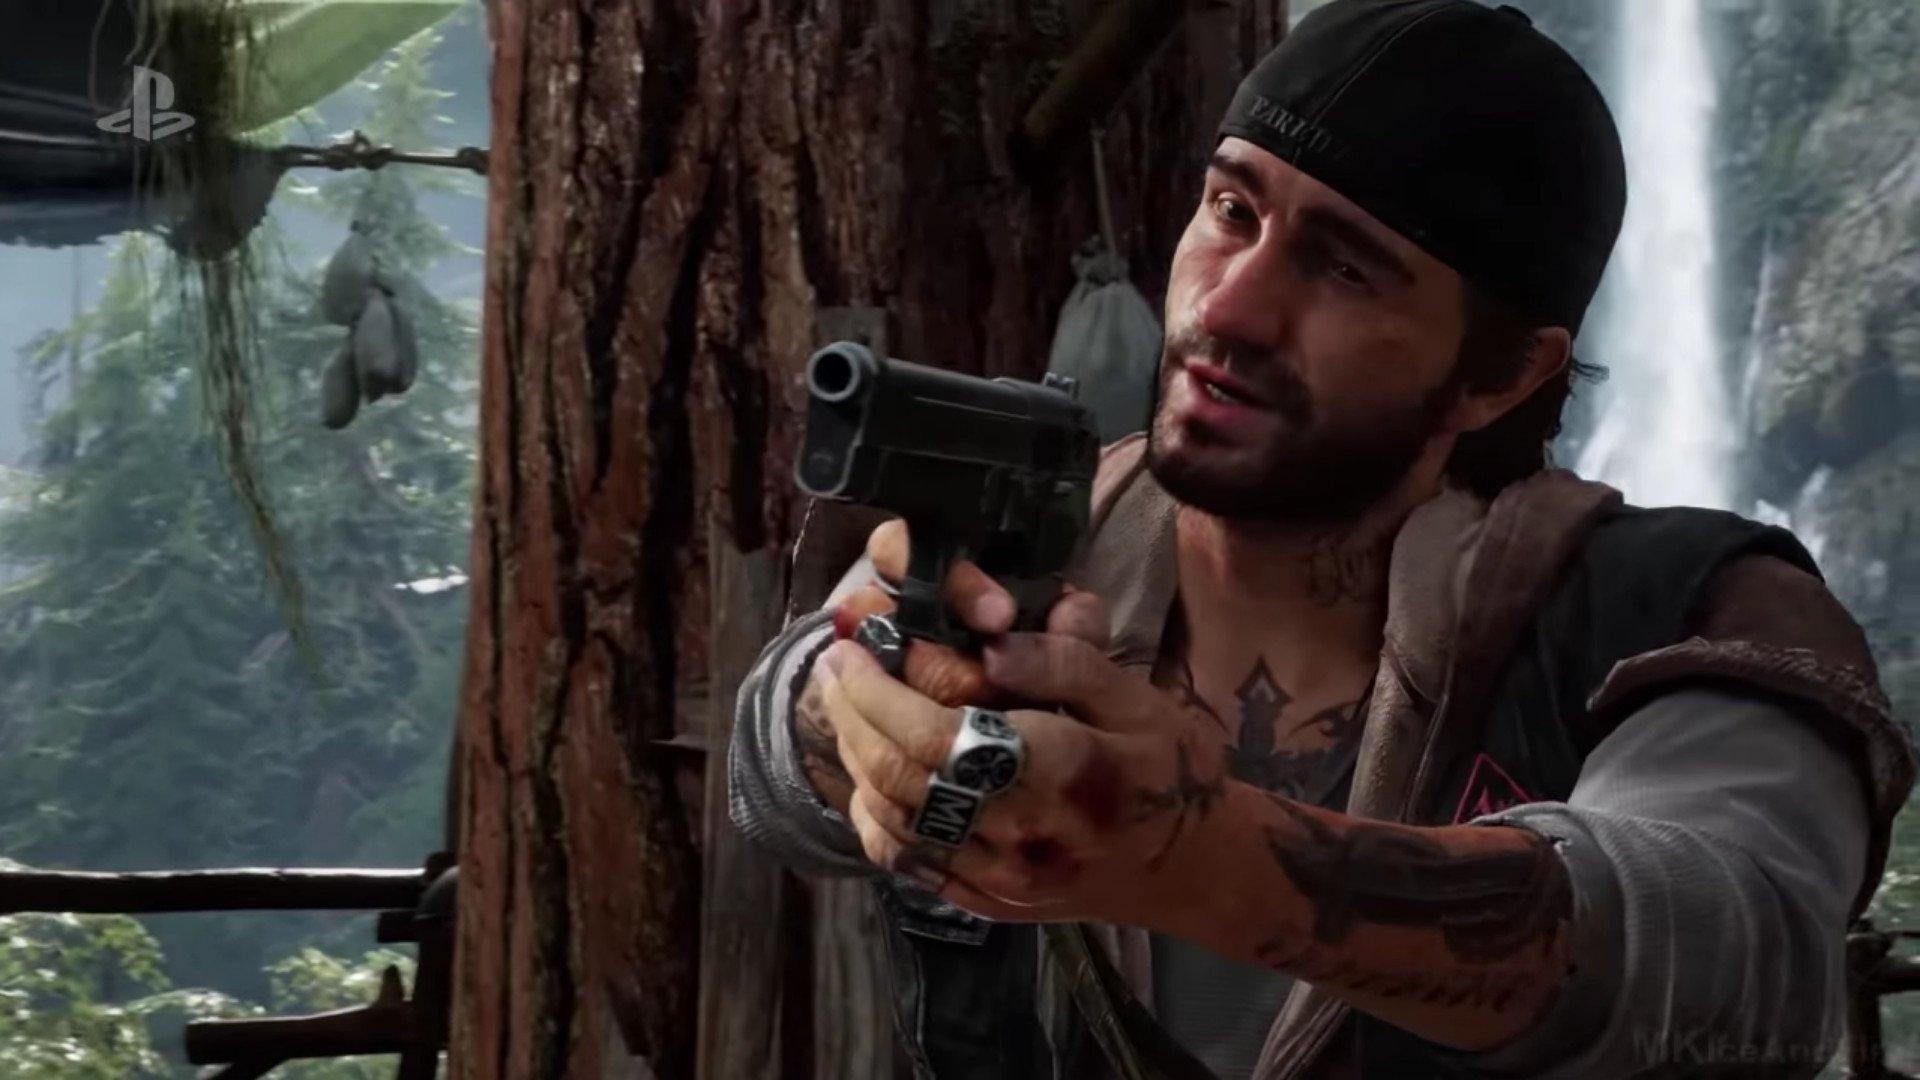 PS4 Exclusive Days Gone Release Date Delayed to 2019